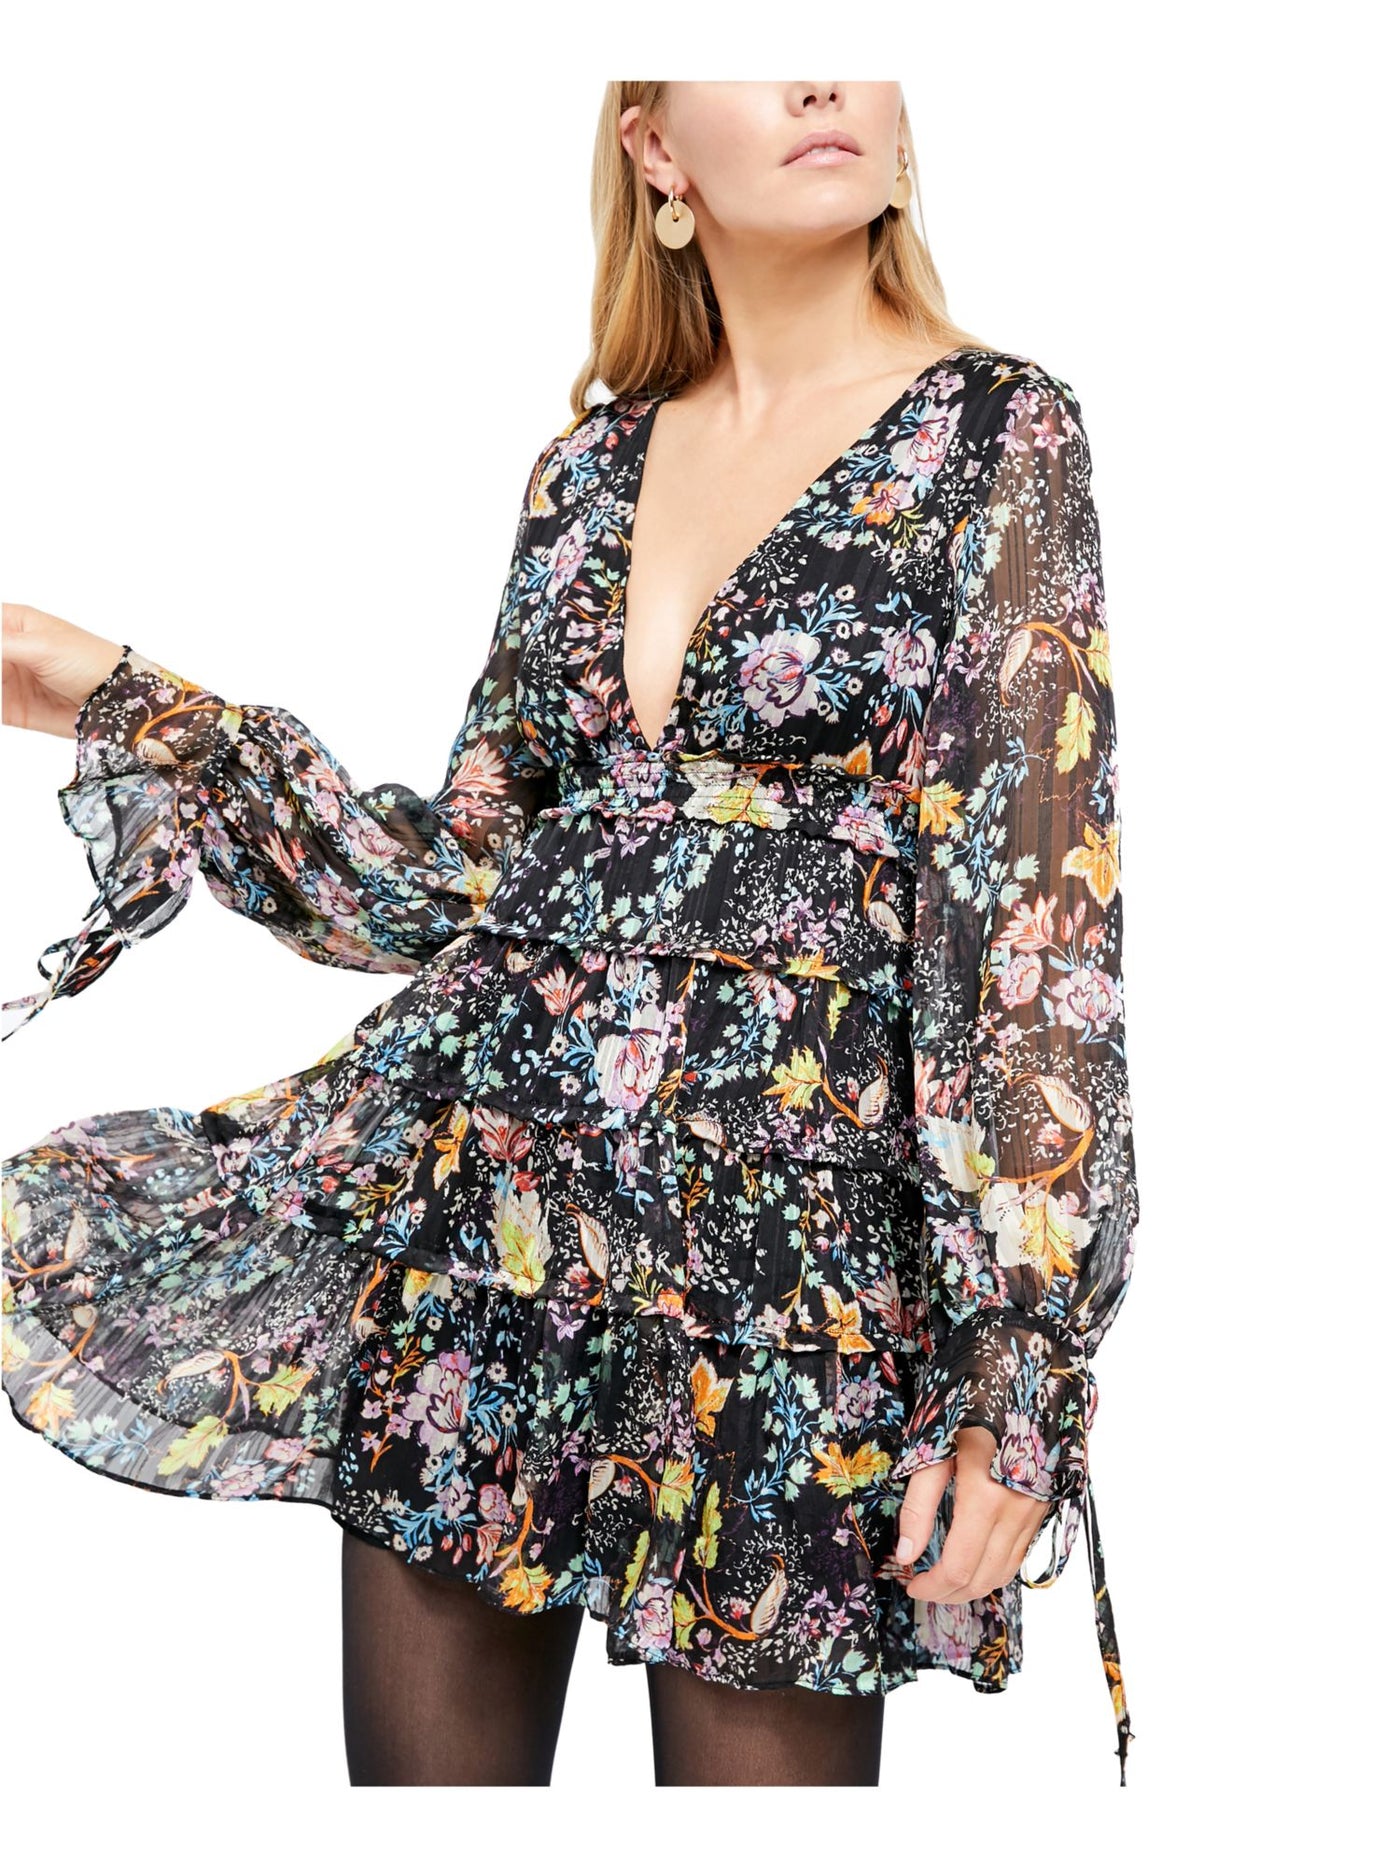 FREE PEOPLE Womens Black Floral Long Sleeve V Neck Mini Party Ruffled Dress S